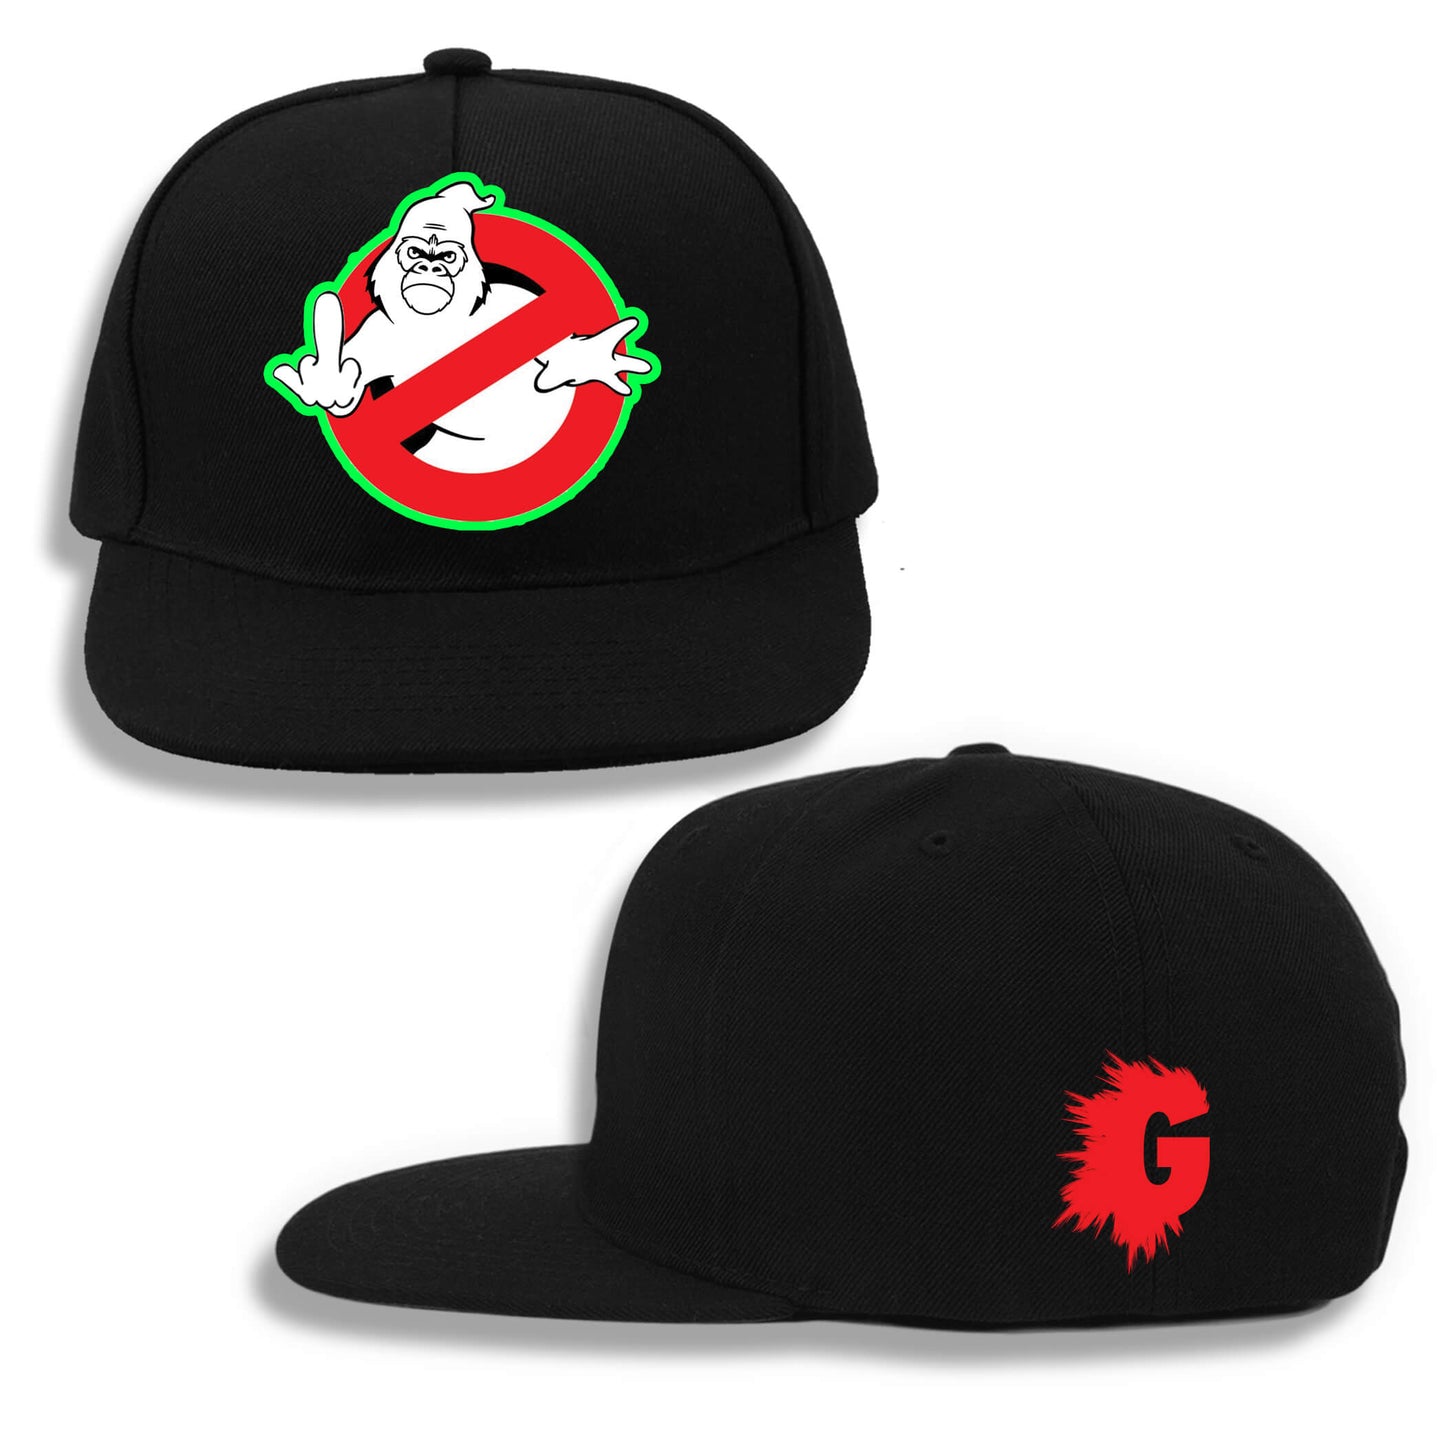 G BUSTERS SNAPBACK